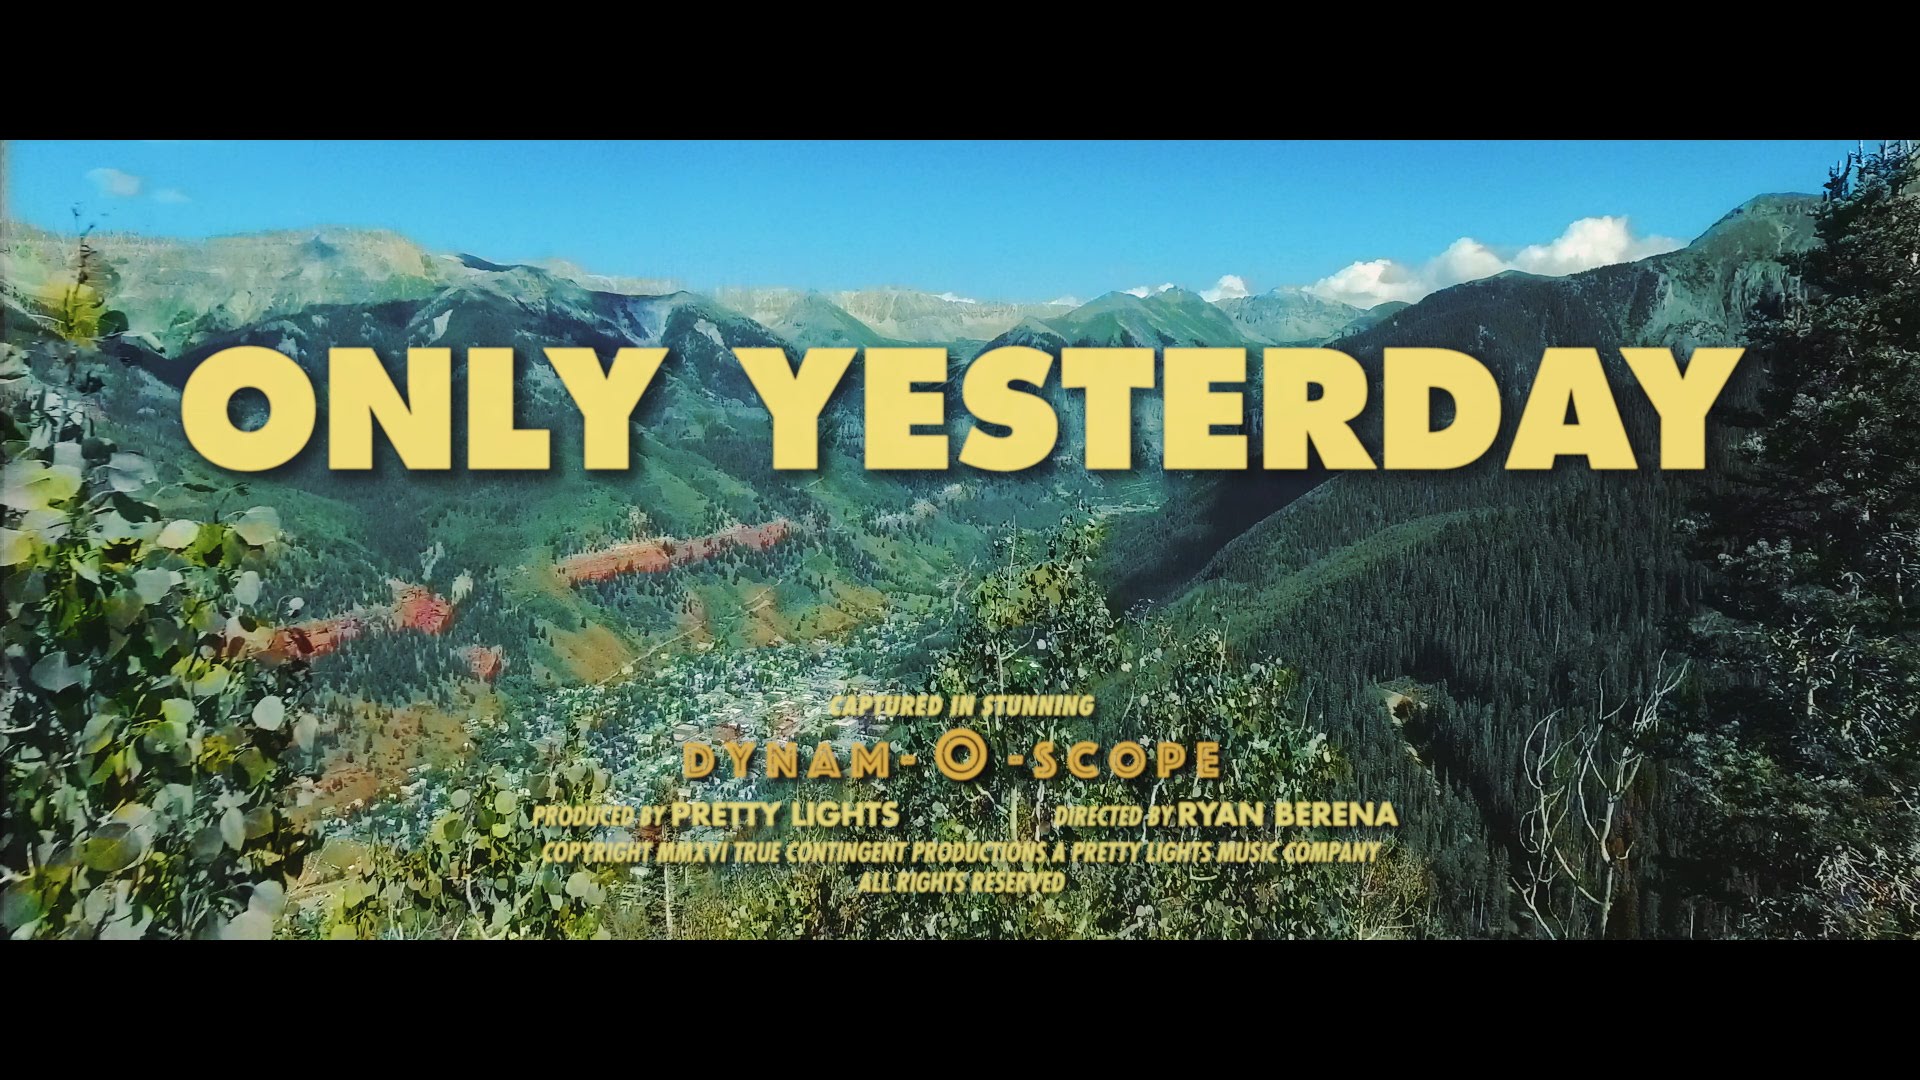 Only Yesterday HD wallpapers, Desktop wallpaper - most viewed